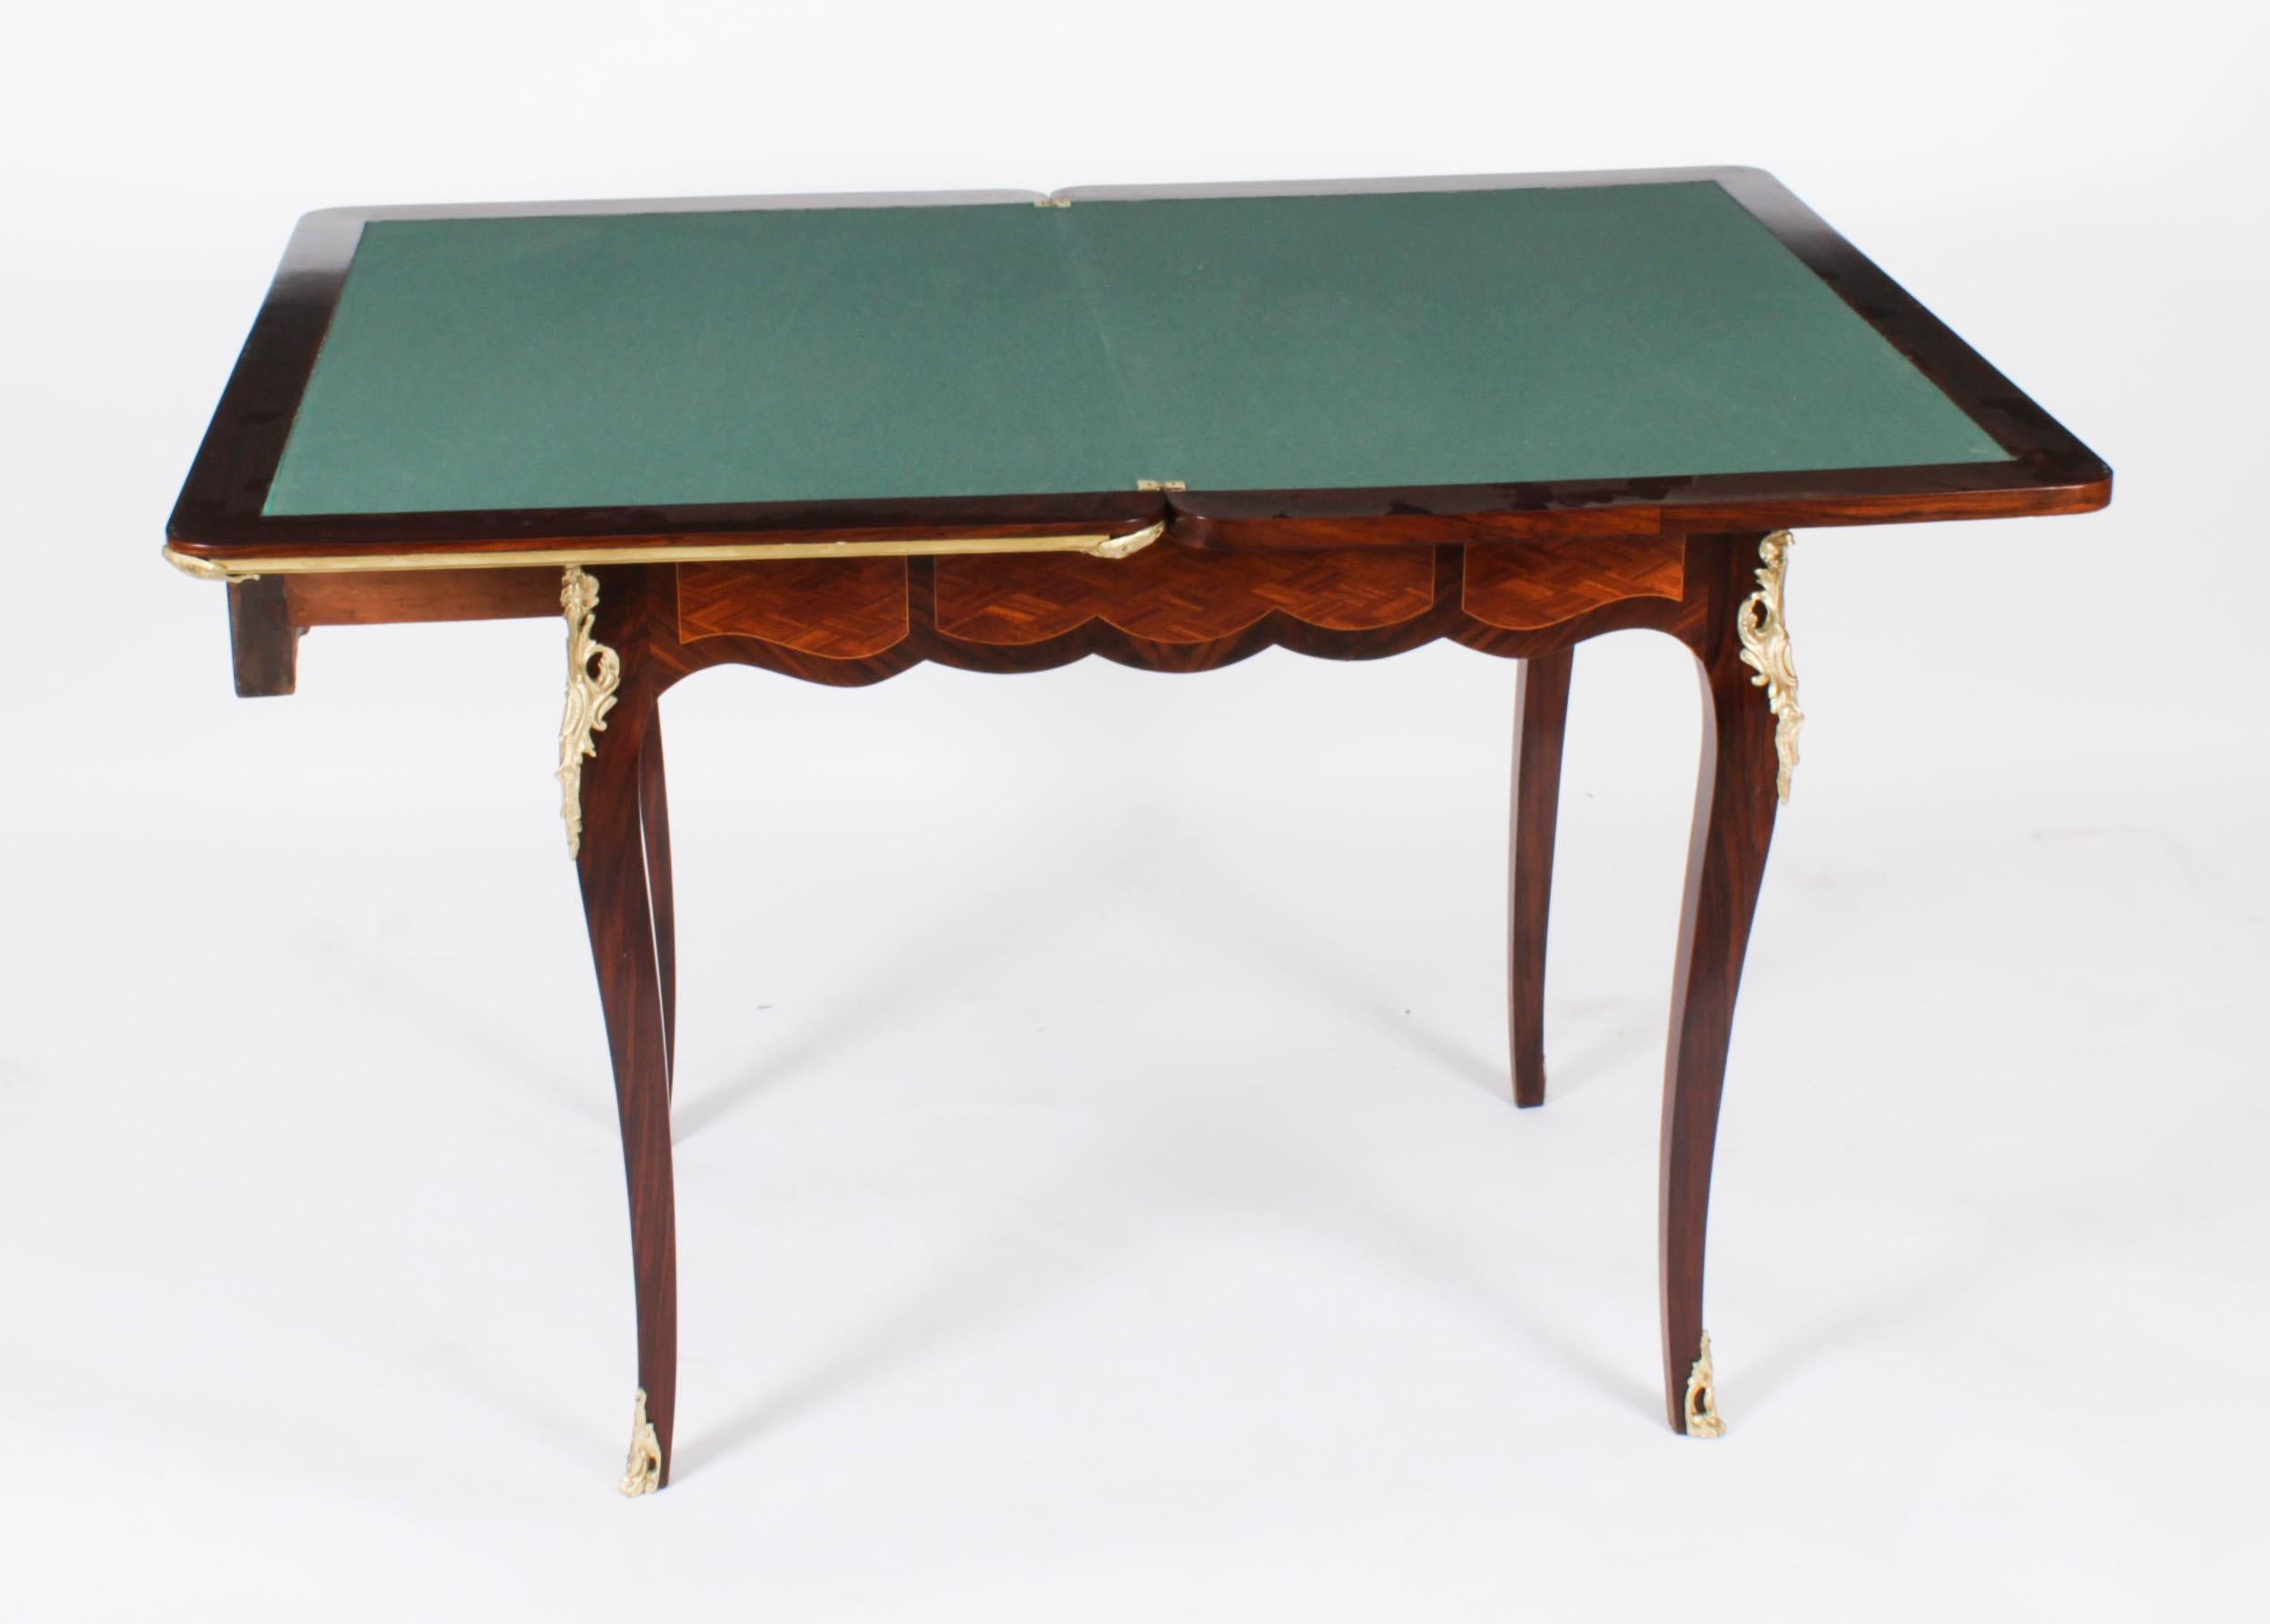 Antique French Burr Walnut Parquetry Card Backgammon Table 19th Century For Sale 7